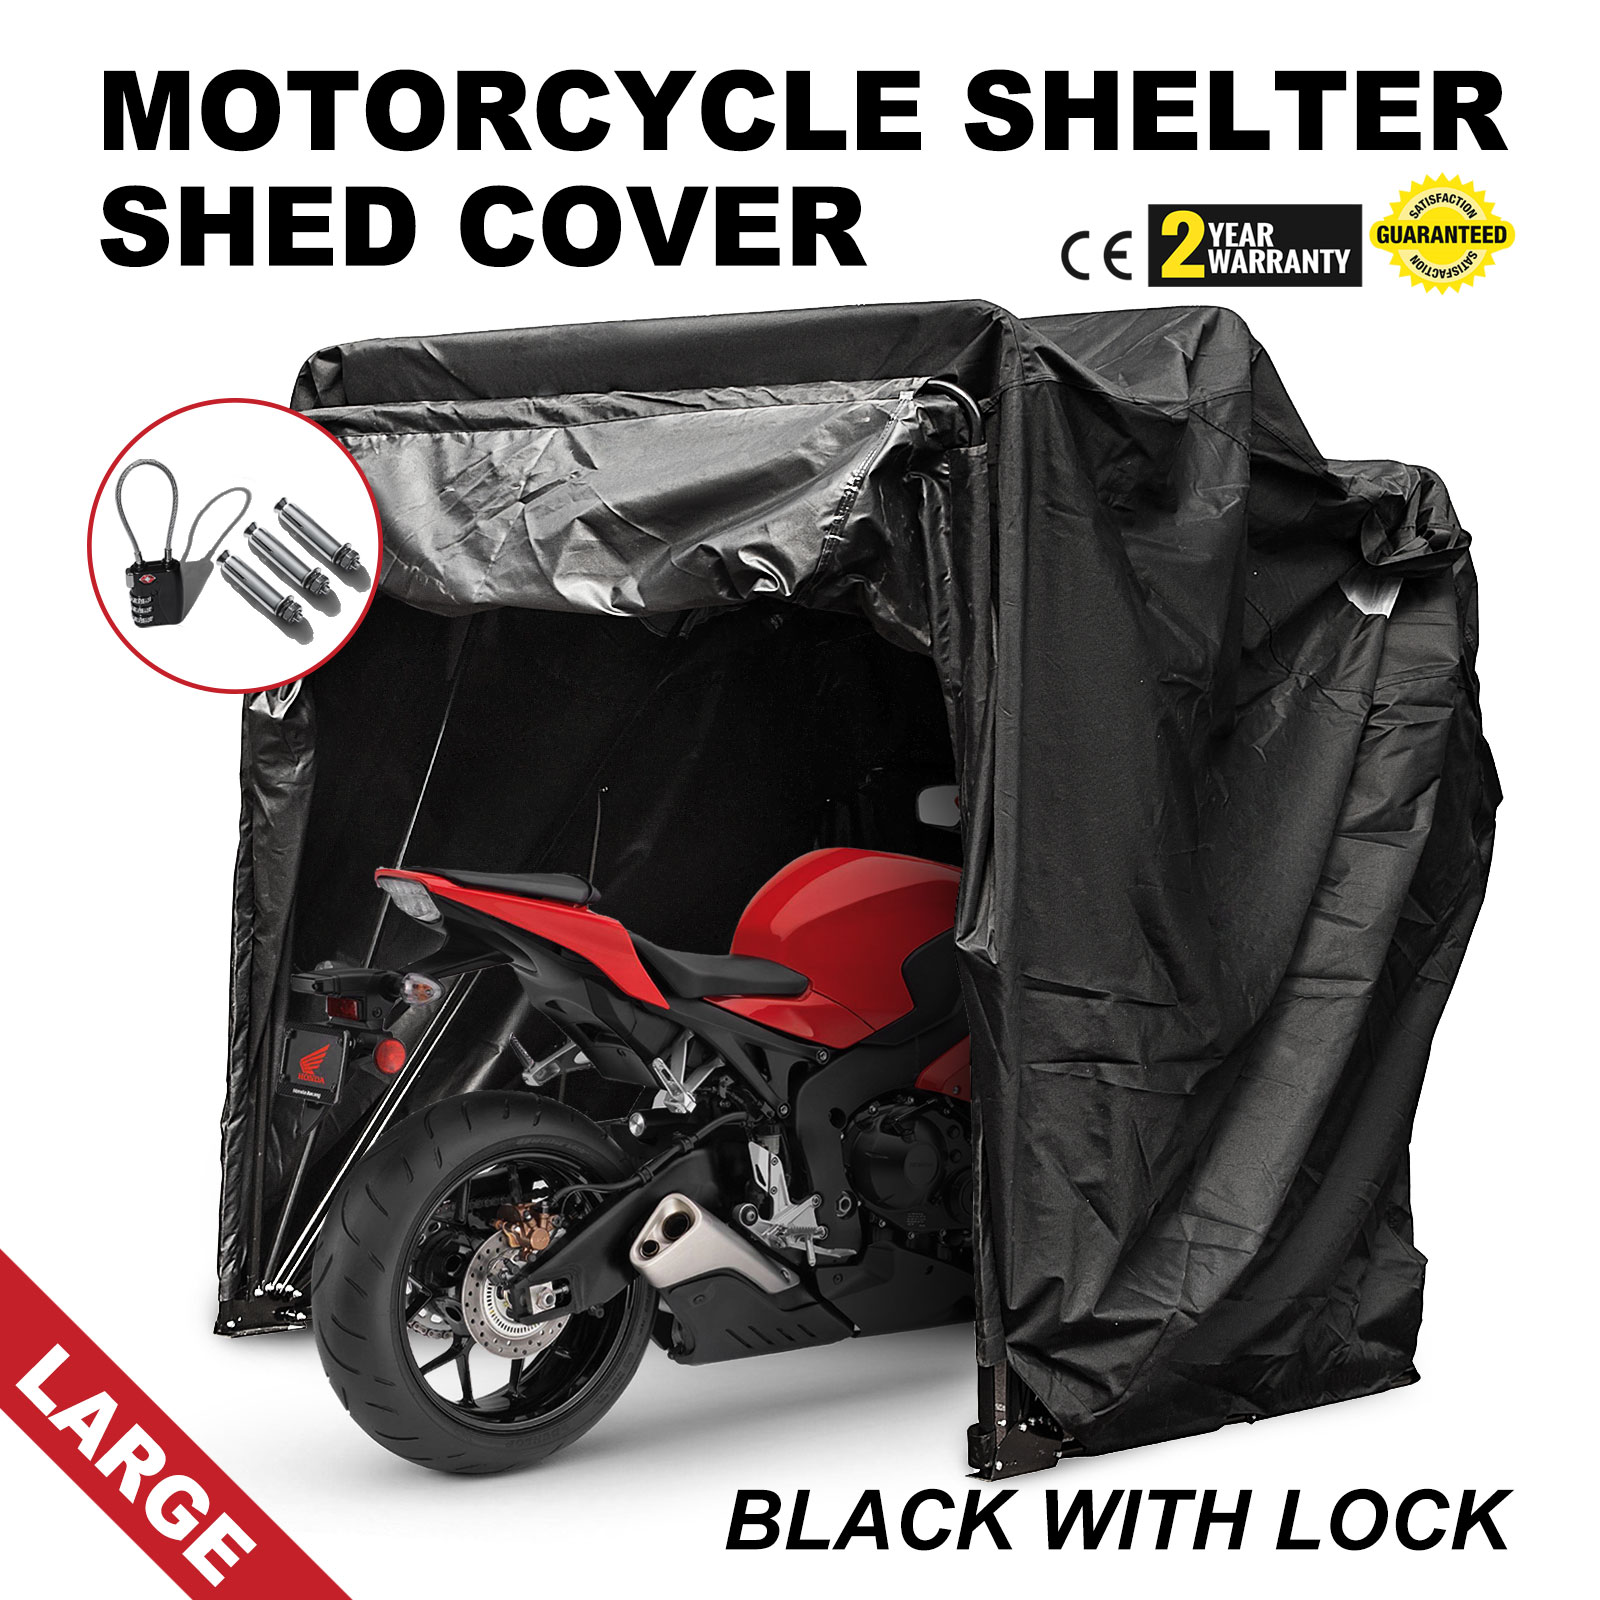 Heavy Duty Large Motorcycle Shelter Shed Cover Storage 